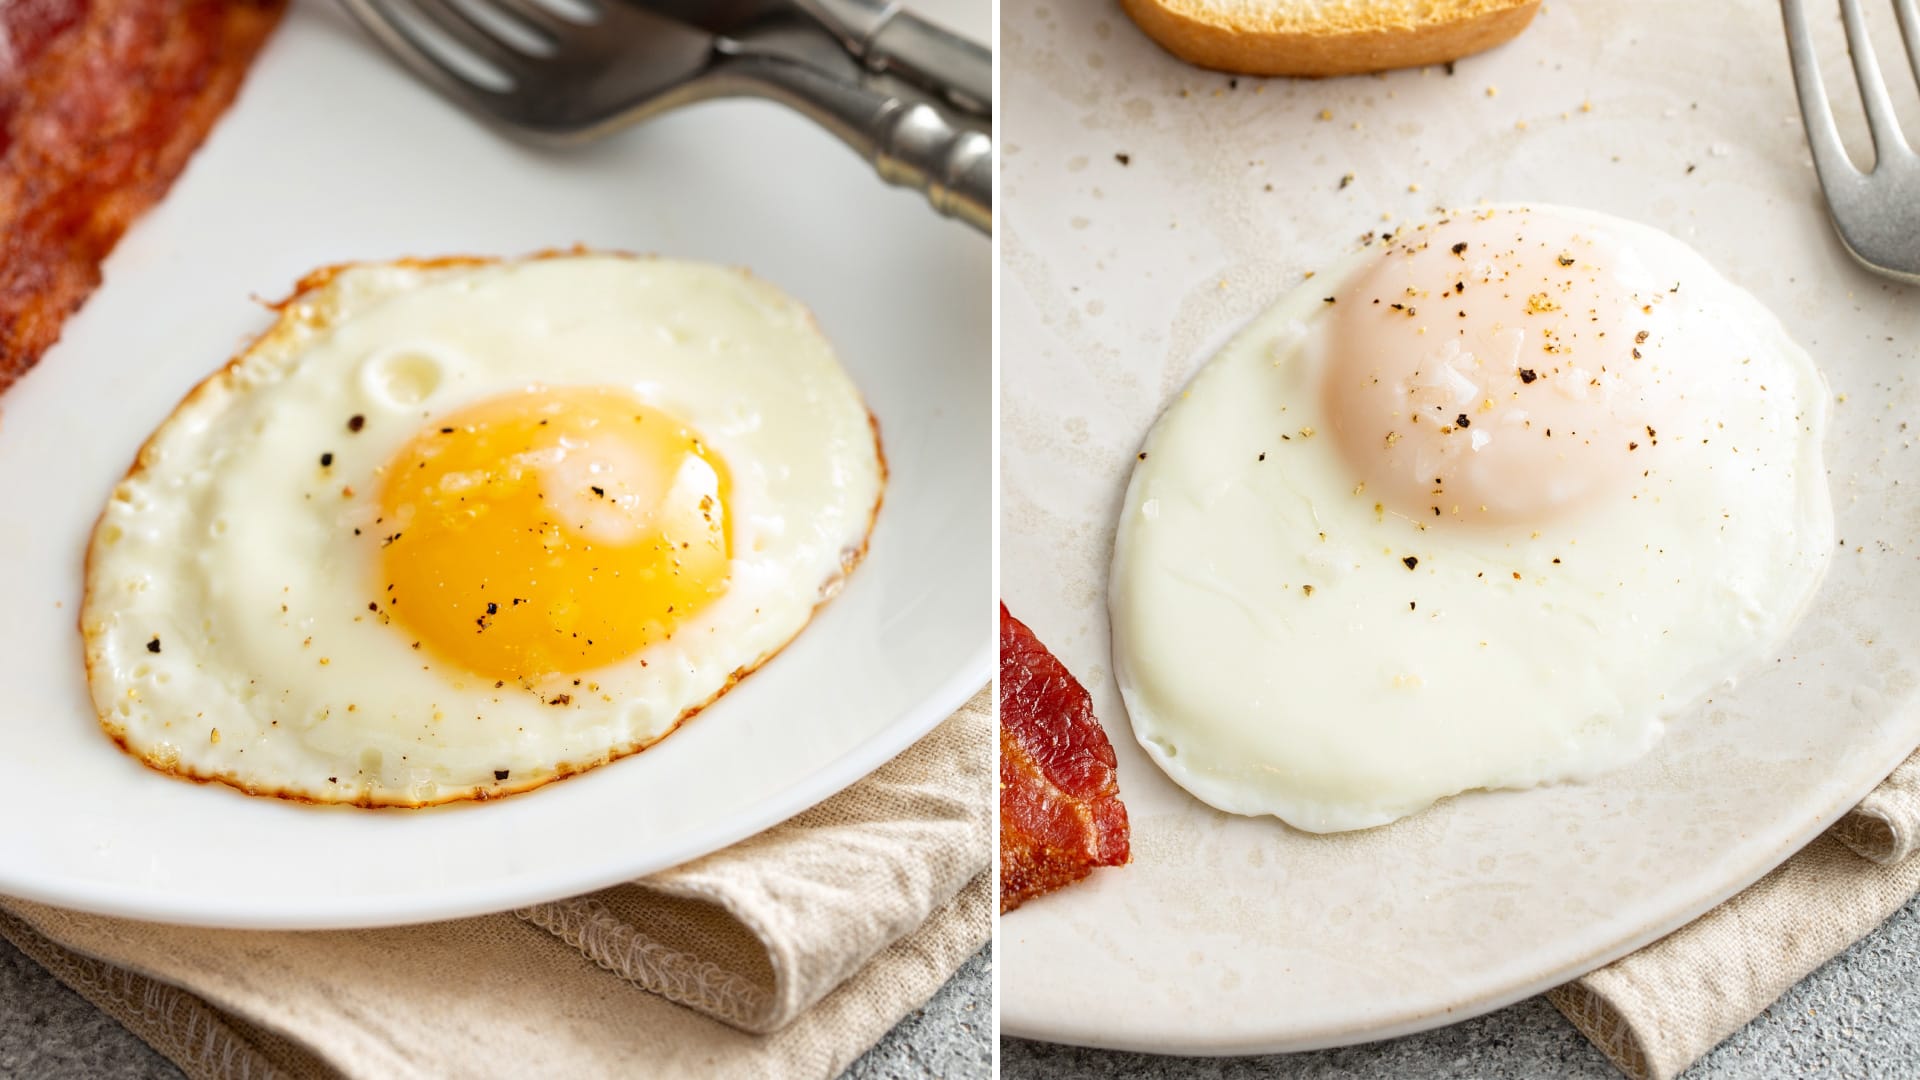 Perfect Fried Eggs - Framed Cooks